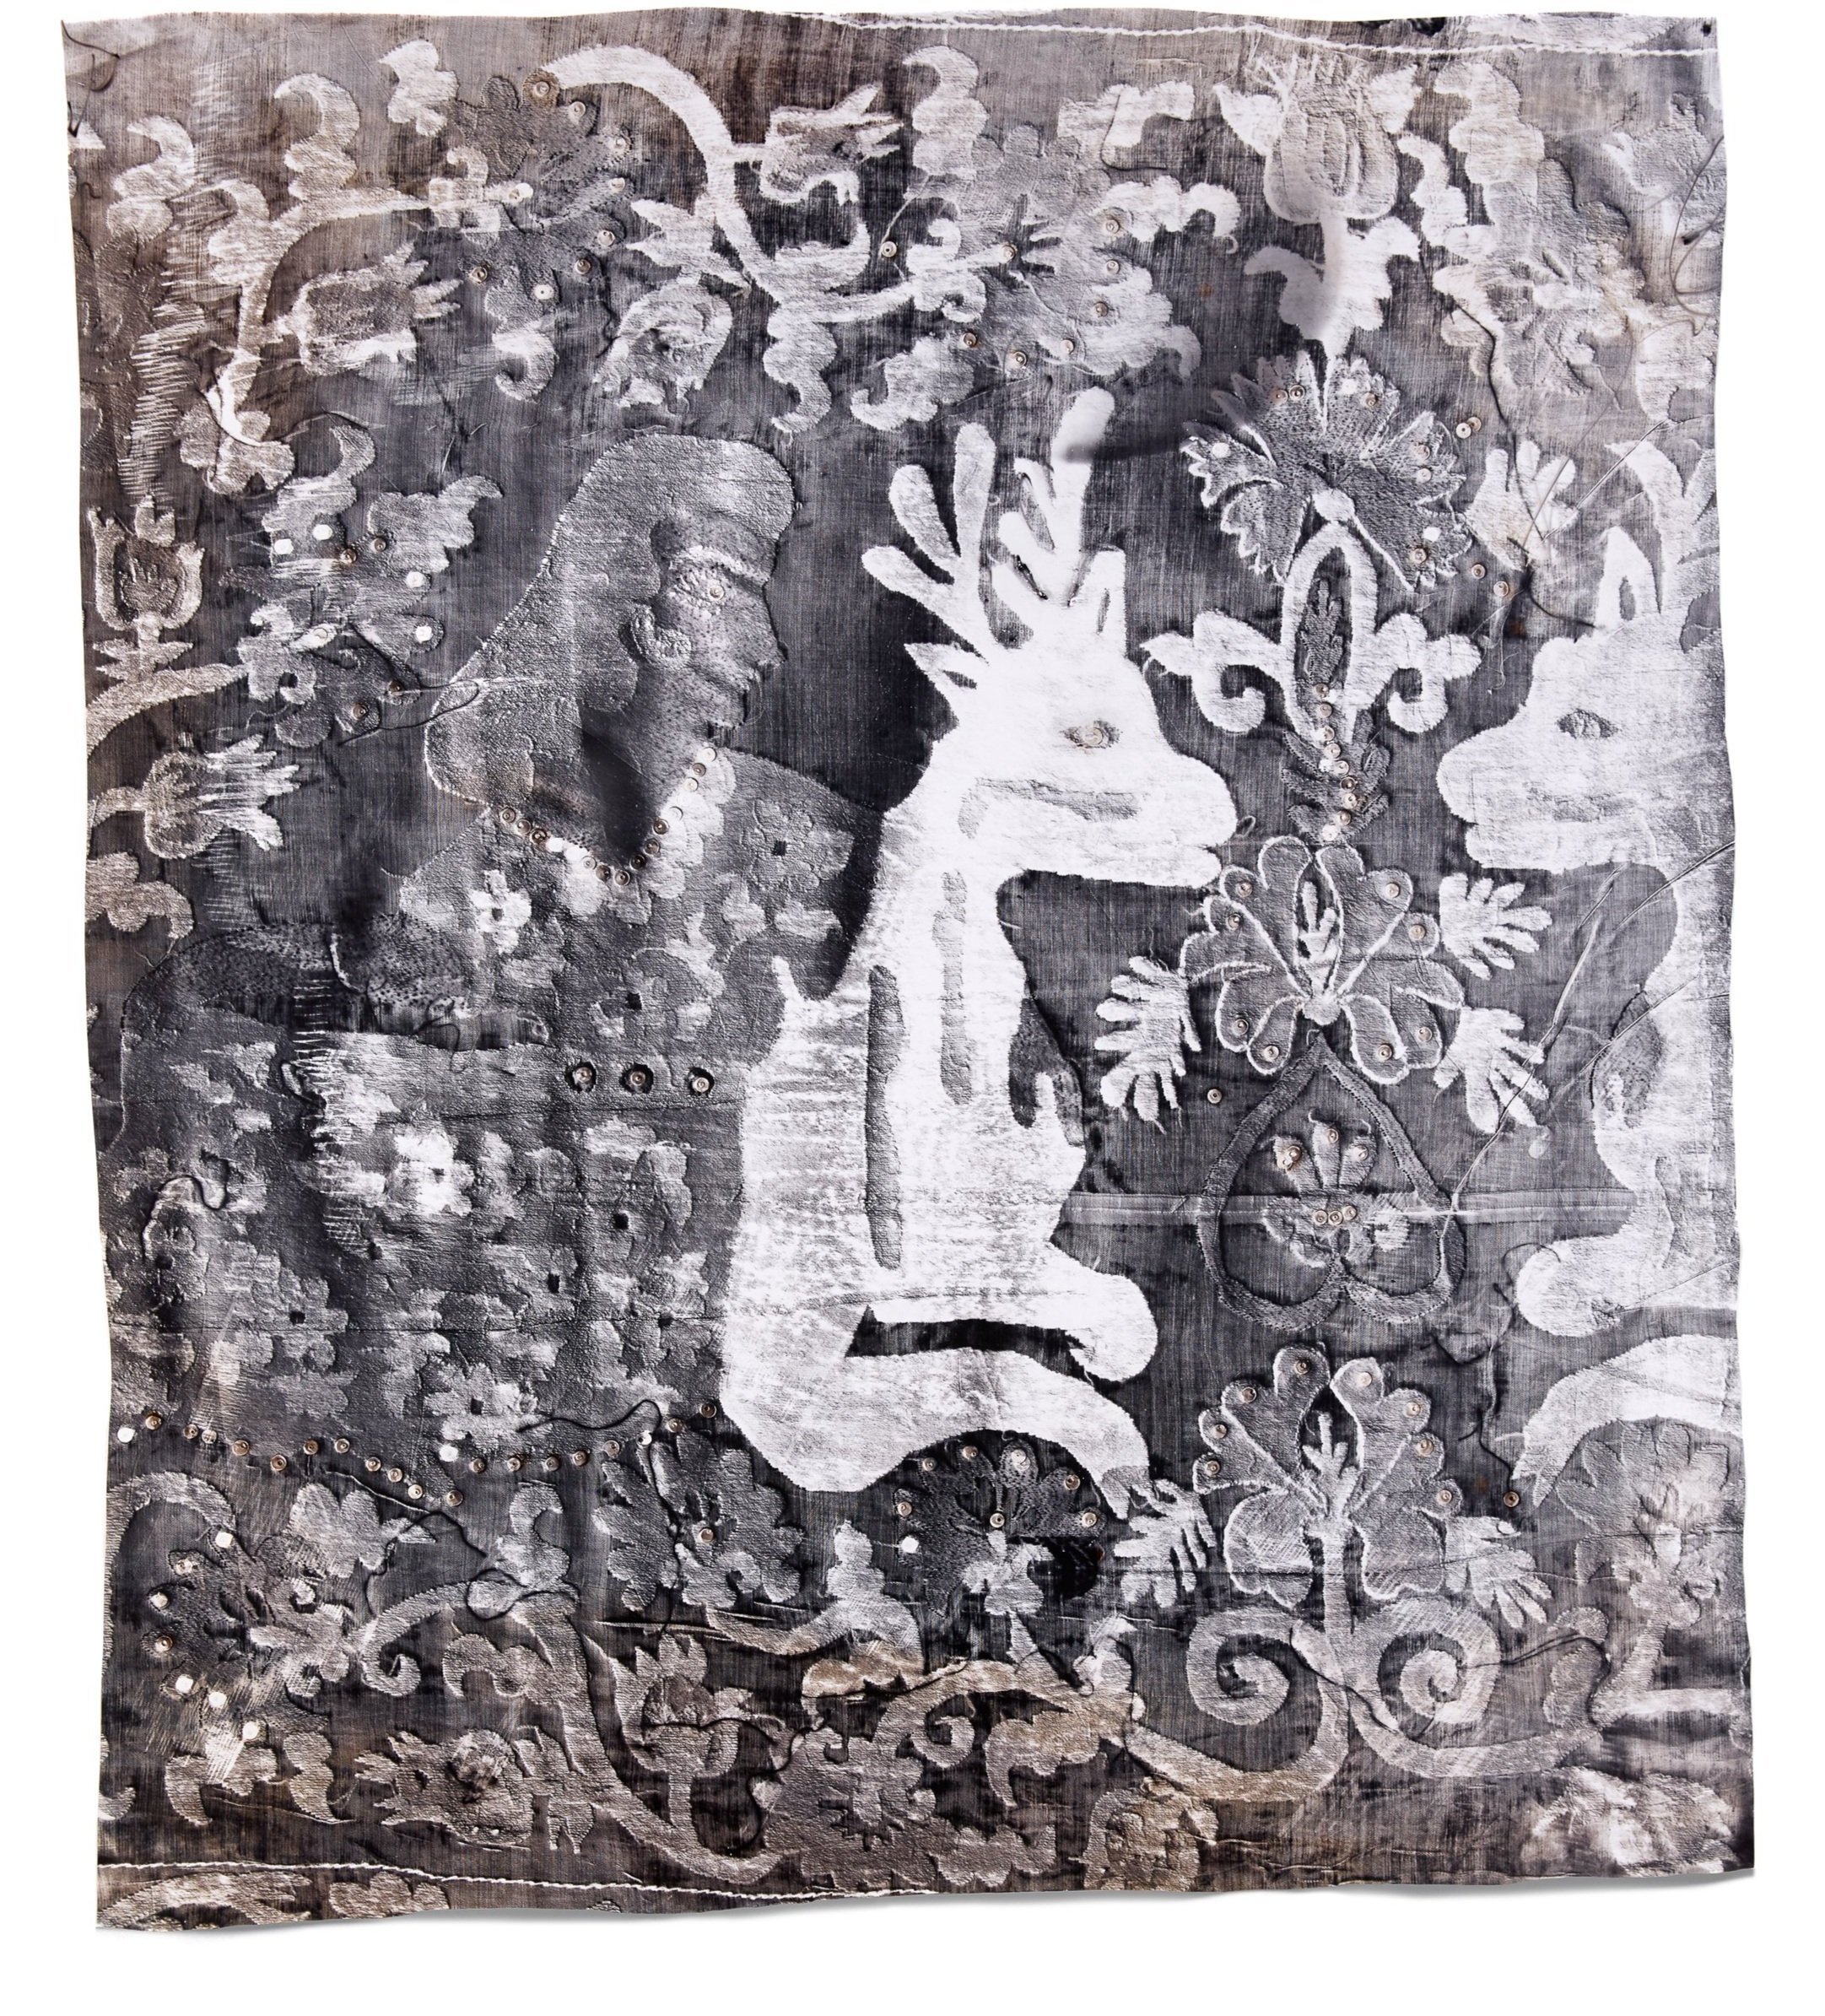   Prophecy,  2019 Photographic relief (embossed silver gelatin photogram, copper and sepia toned) Impression of hand-embroidered tapestry or Suzani (Uzbekistan, Boysun region, 1960s) 43 x 38 in 